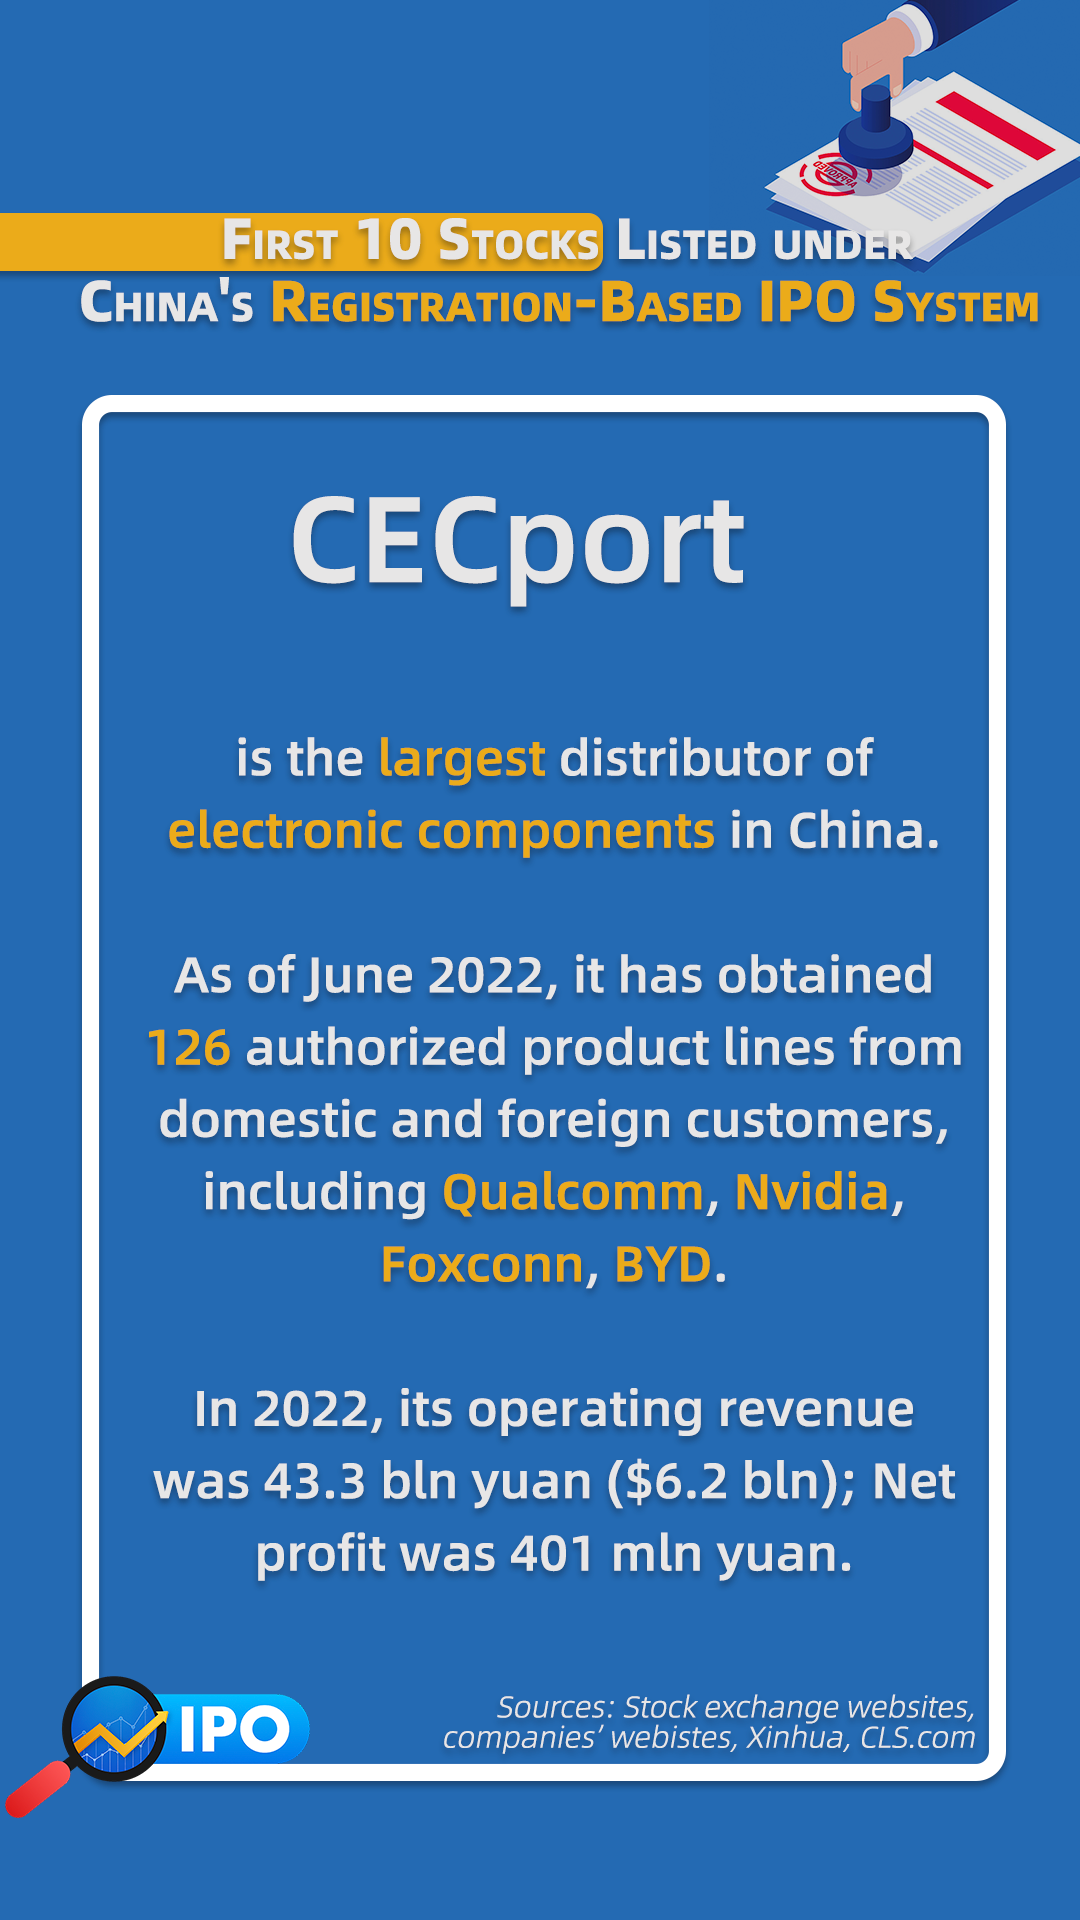 CECport, one of the 10 listed companies